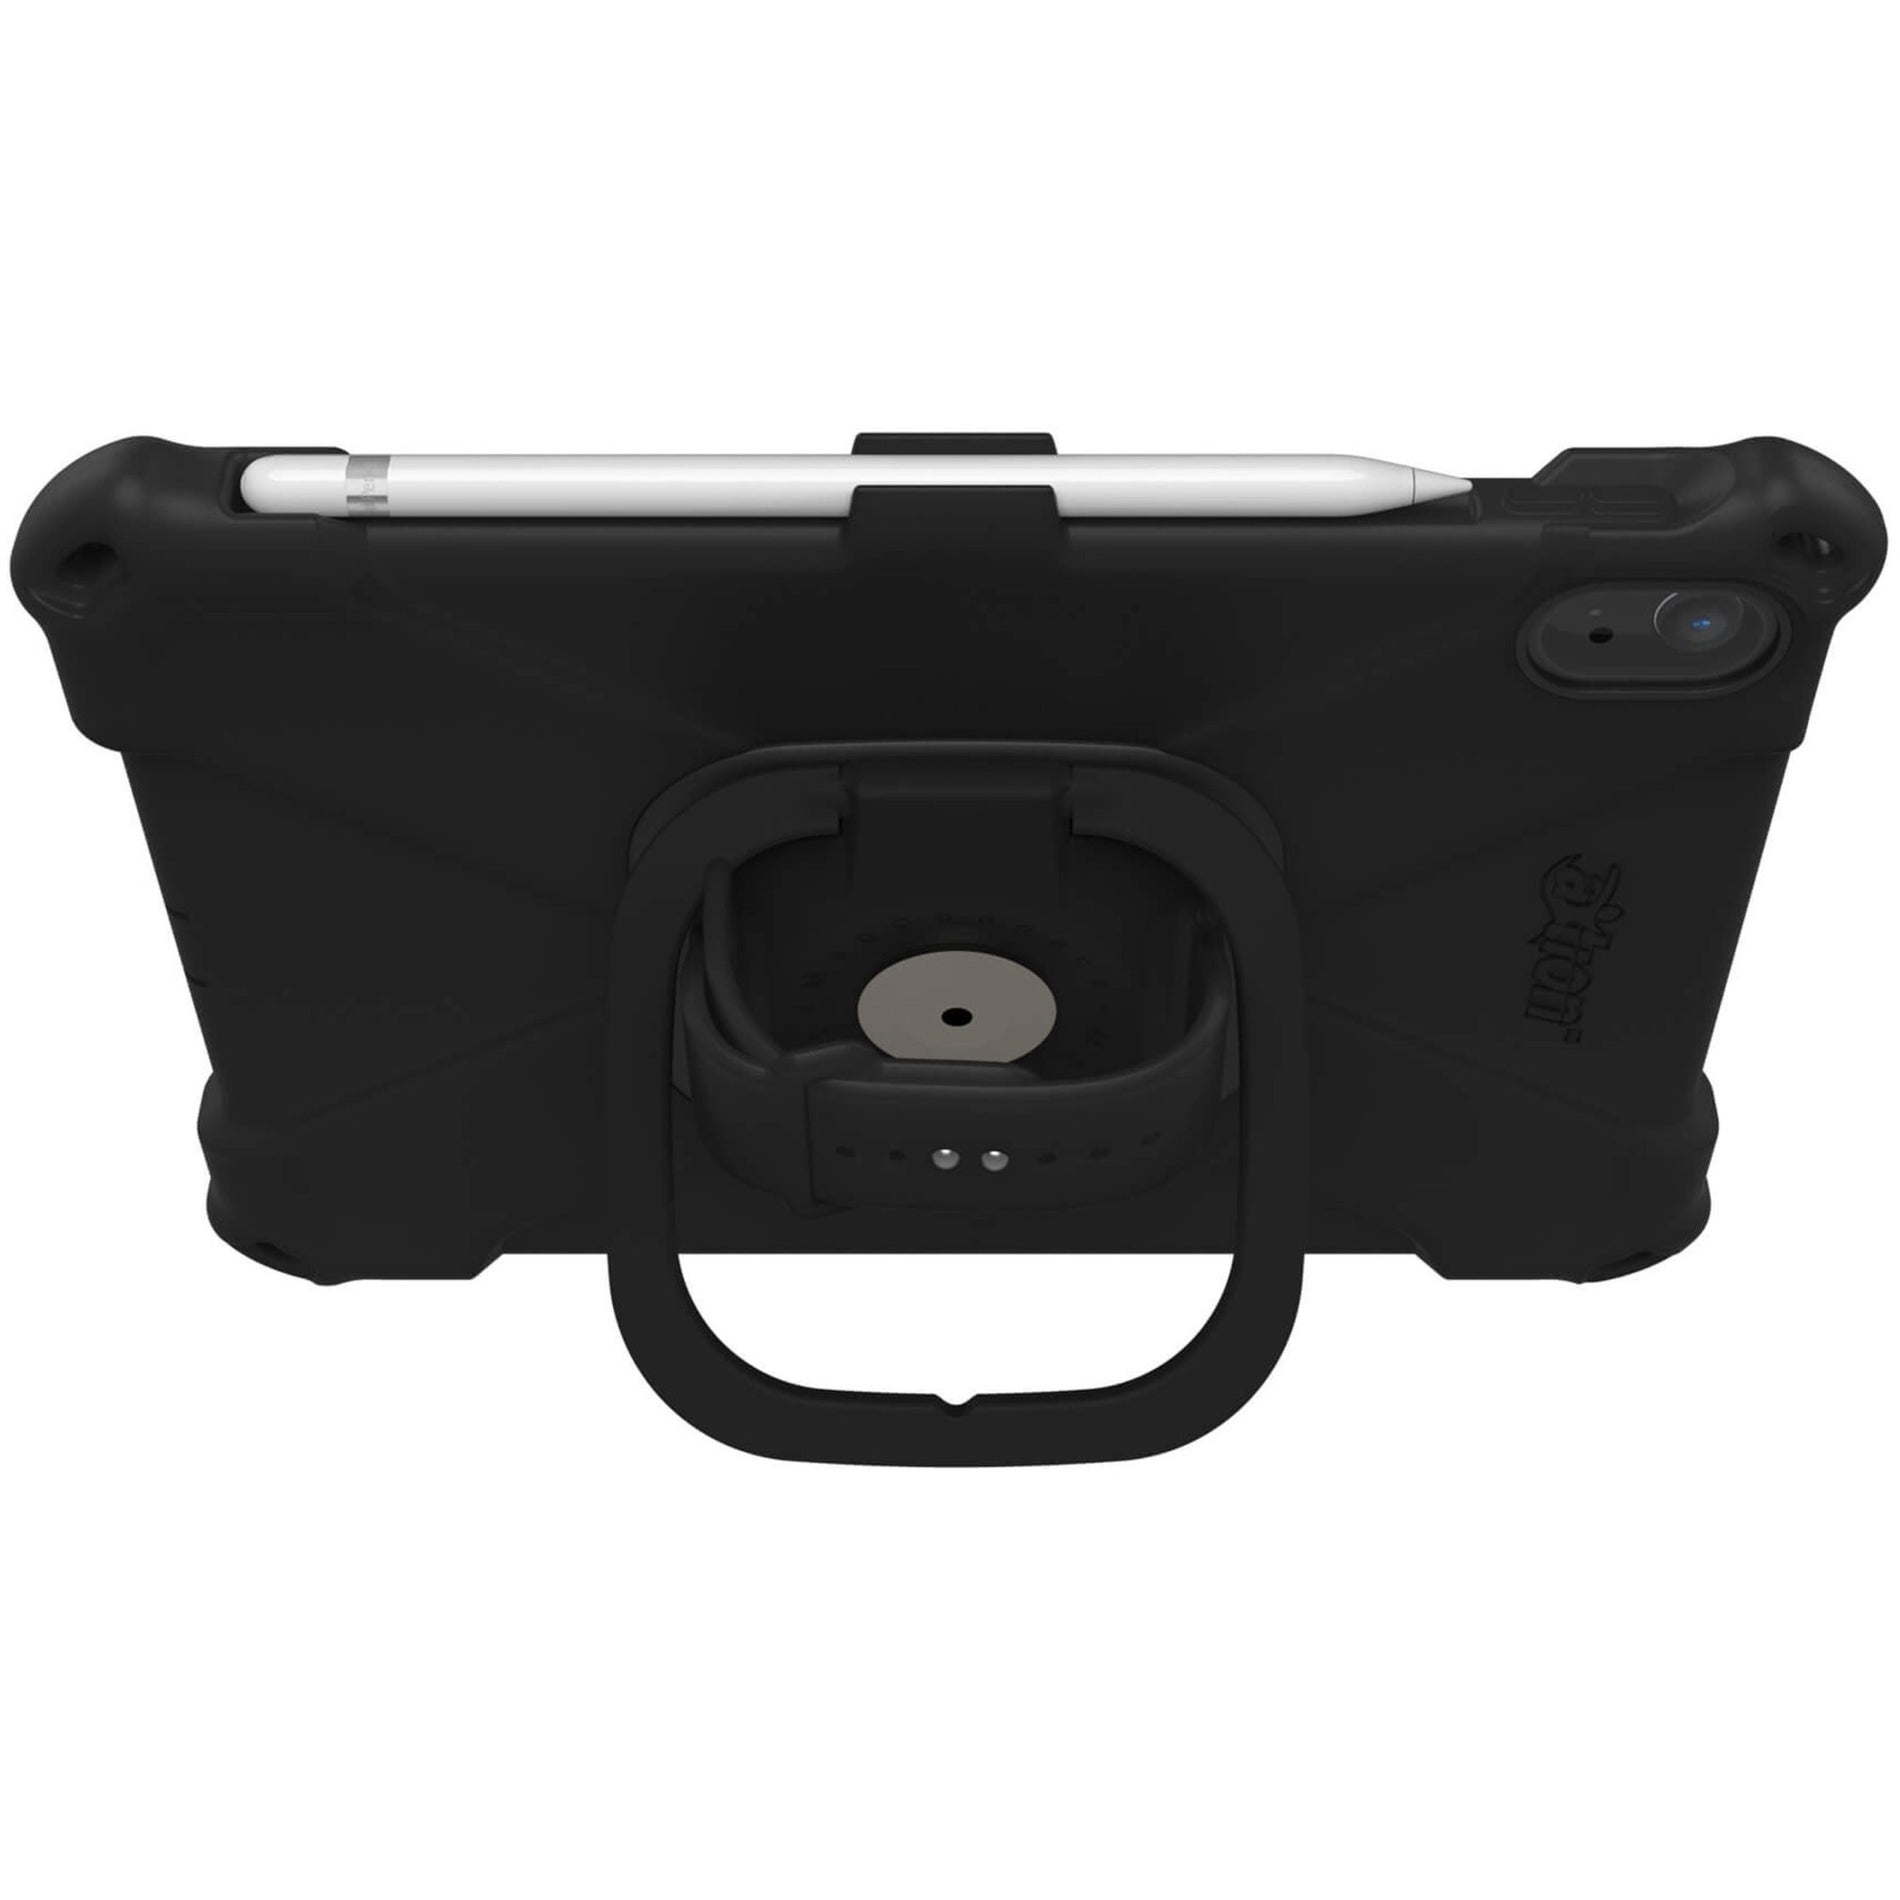 The Joy Factory CWA652MP aXtion Bold MP for iPad 10.9-inch 10th Gen, Military-Grade Water-Resistant Rugged Case with Hand Strap and Kickstand